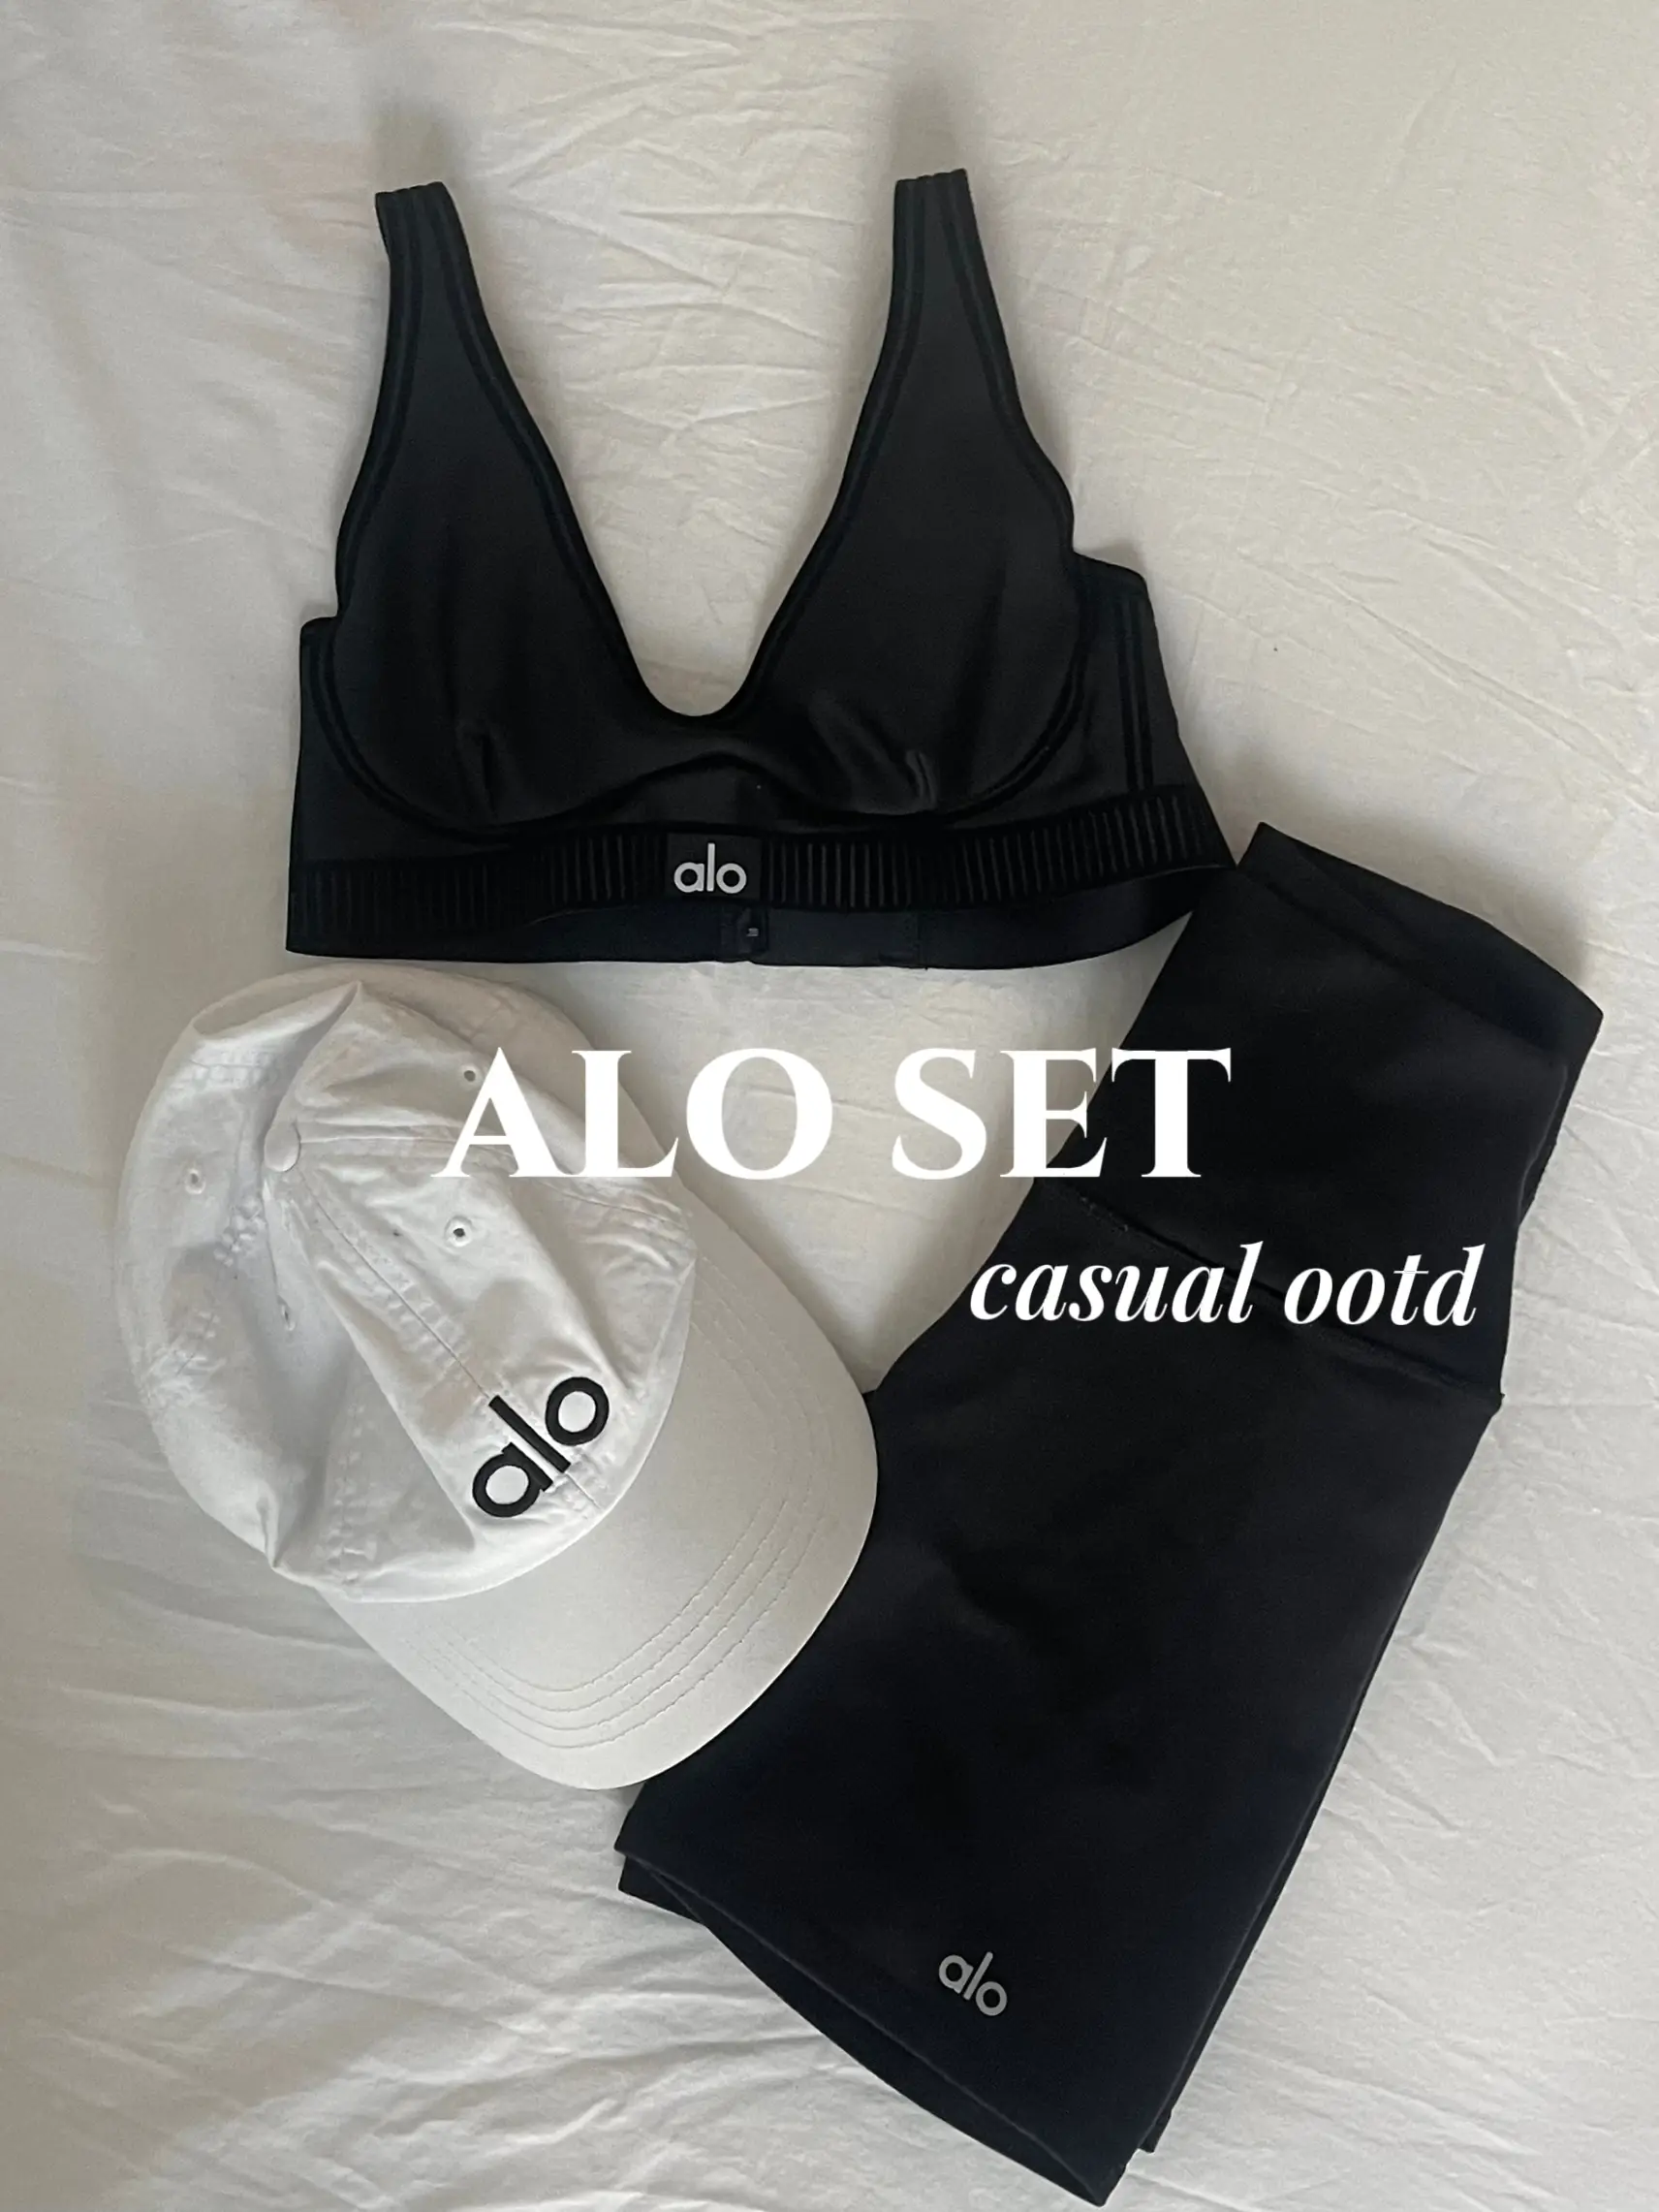 WORKOUT OOTD: Alo Yoga, Gallery posted by beccawise